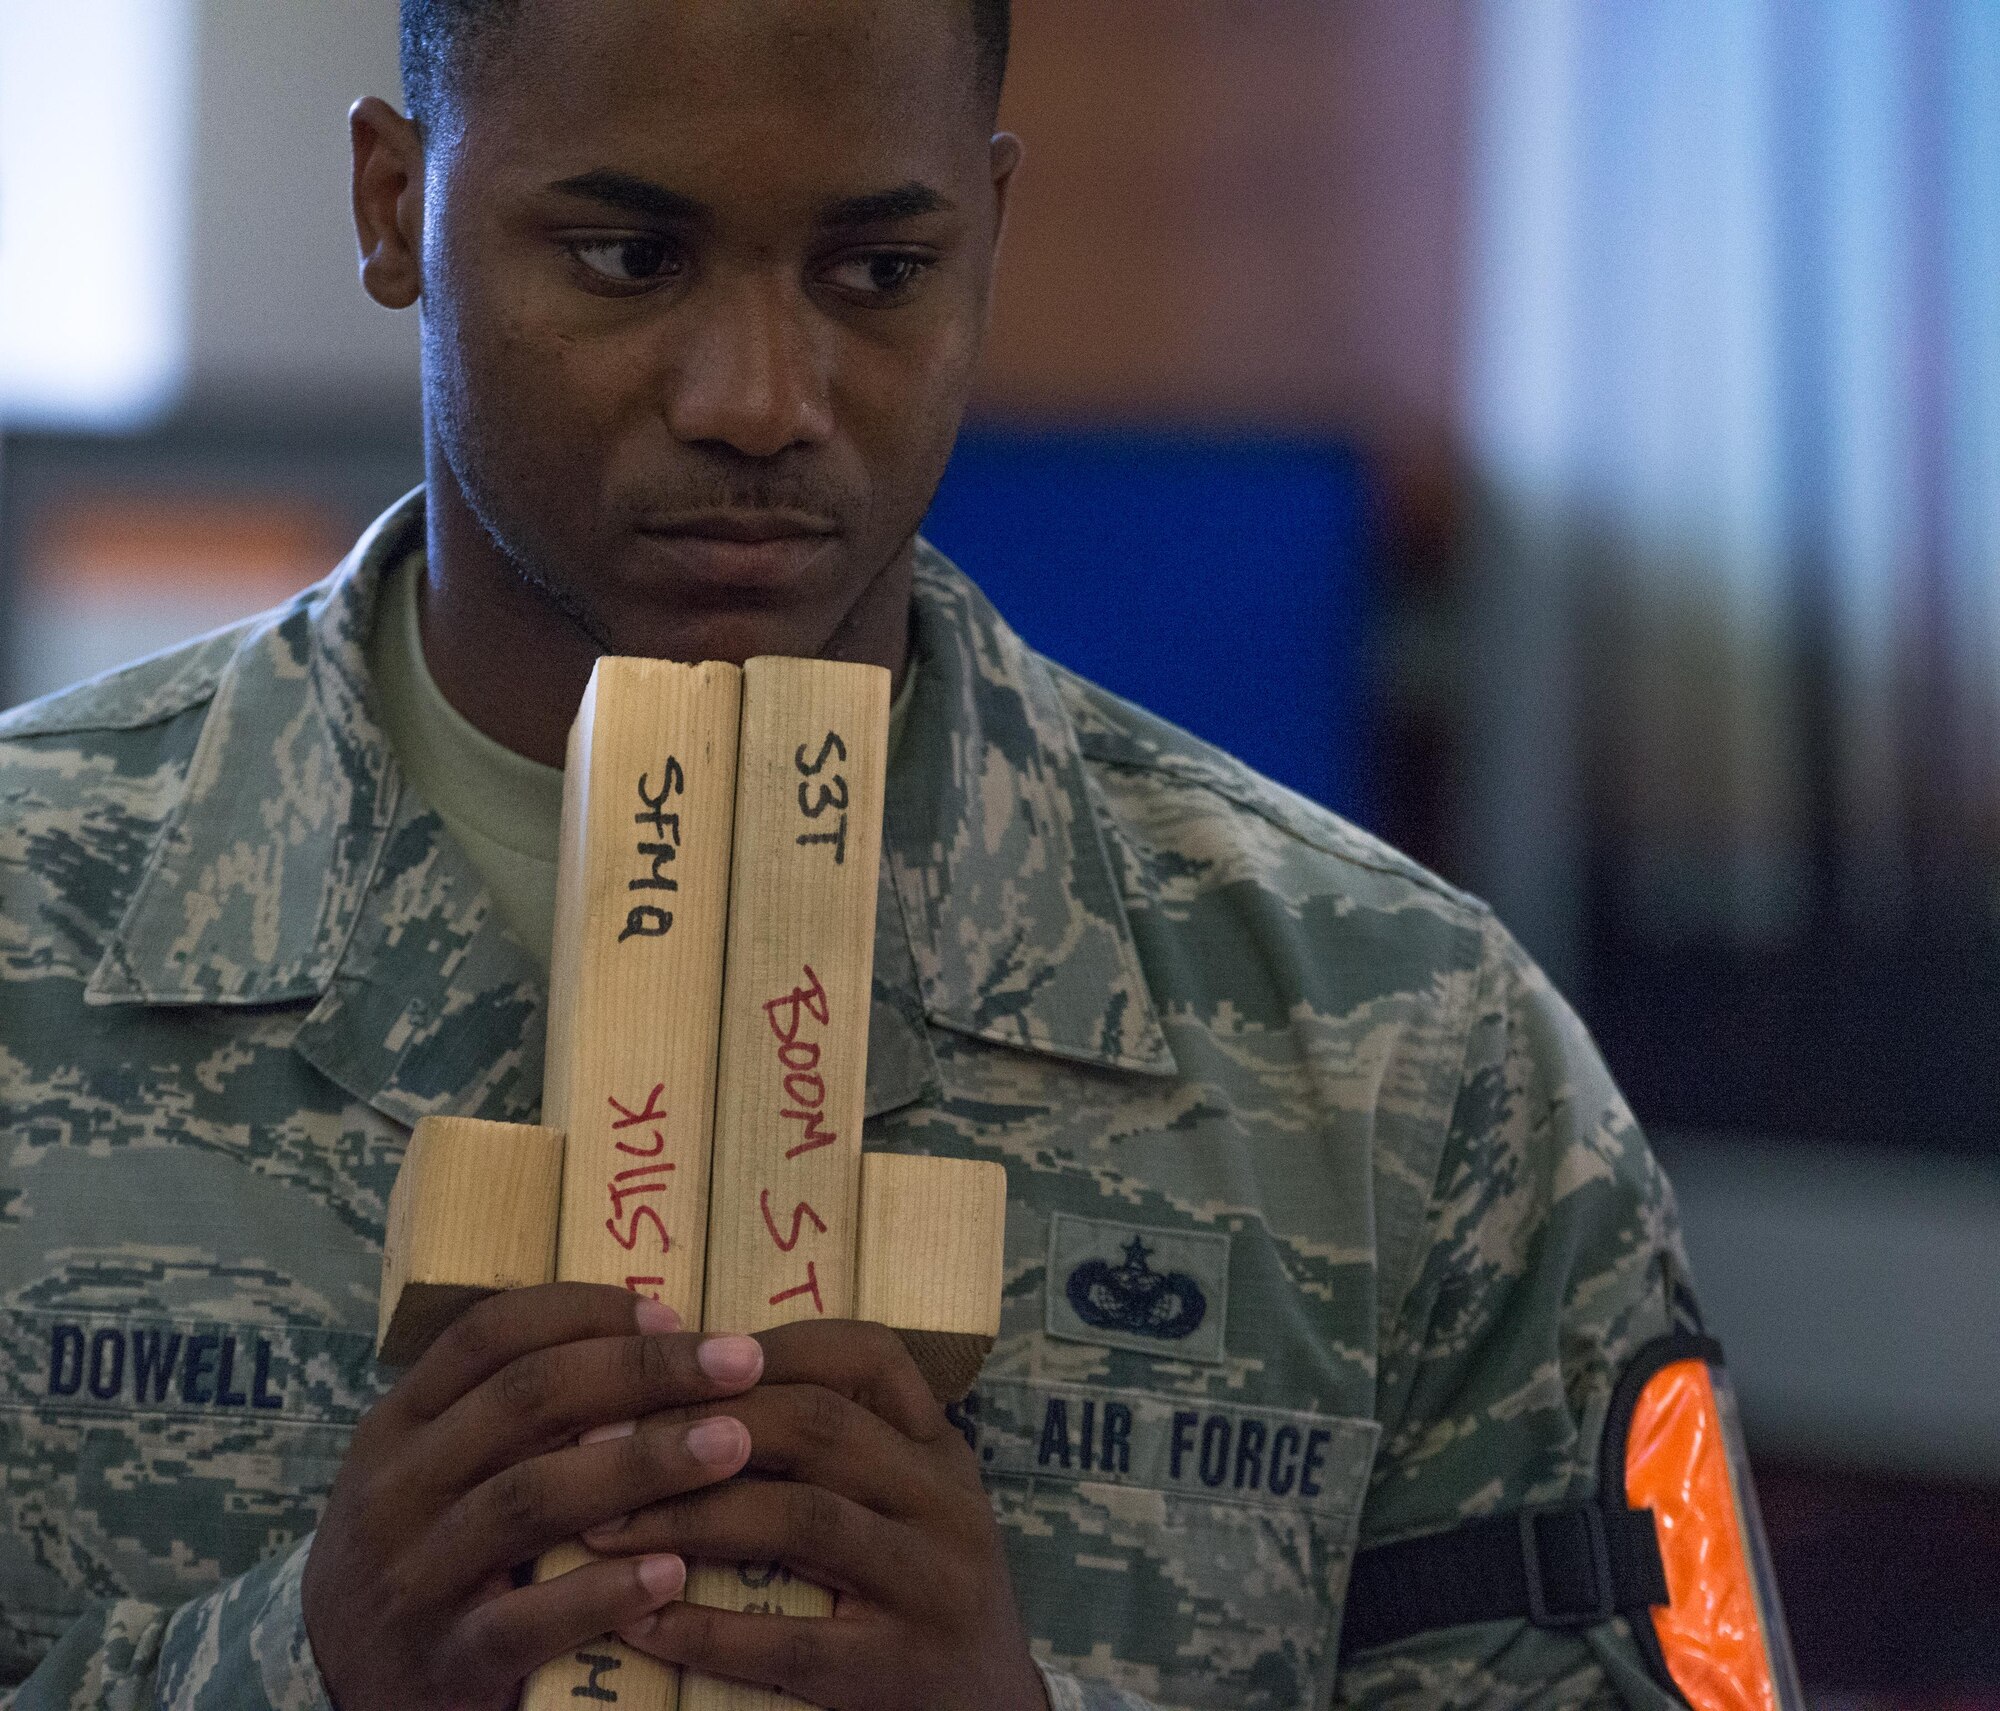 U.S. Air Force Staff Sgt. Rodney Dowell, 36th Security Forces Squadron wing inspection team member, holds boom sticks during an emergency management exercise May 11, 2017 at Andersen Air Force Base, Guam. Boom sticks are used to produce loud percussive sounds, similar to that of gunfire, to enhance the realism of simulated active-shooter scenarios. (U.S. Air Force photo by Airman 1st Class Jacob Skovo)